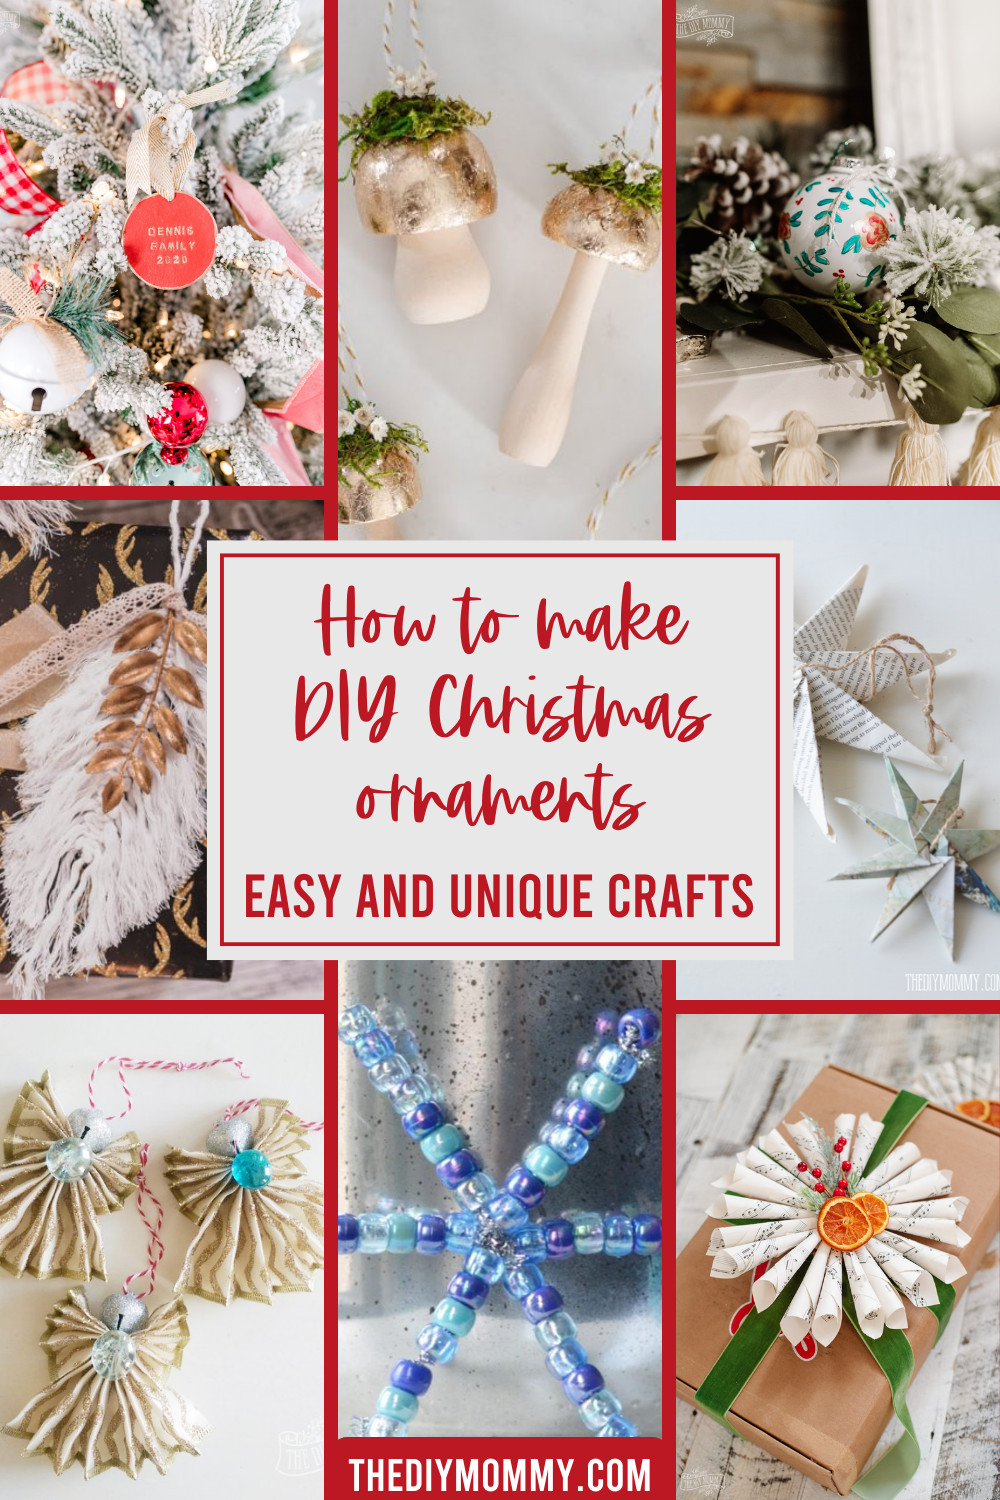 How To Make DIY Christmas Ornaments: Easy And Unique Crafts